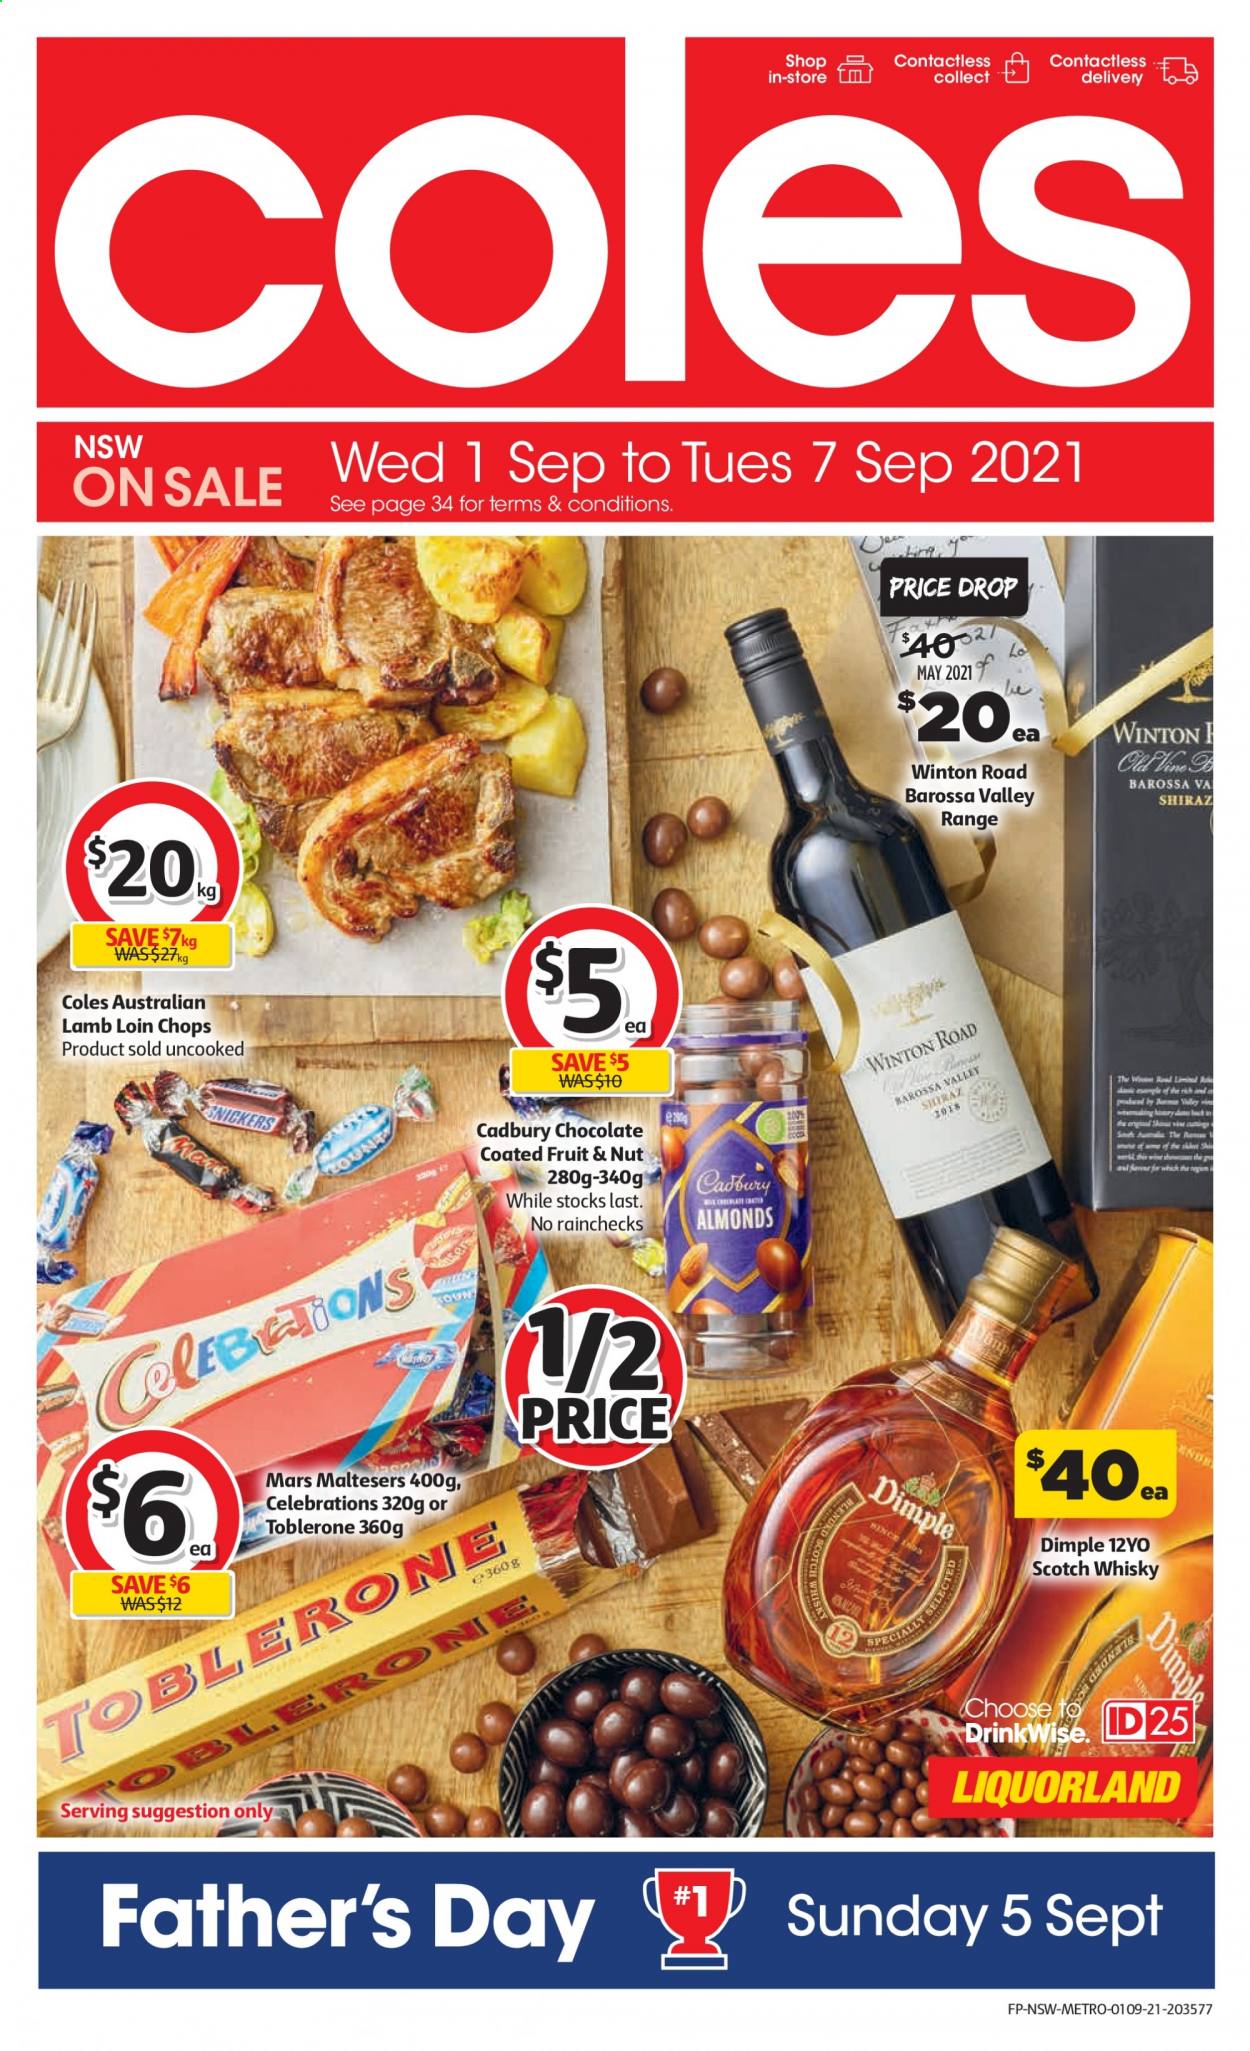 thumbnail - Coles Catalogue - 1 Sep 2021 - 7 Sep 2021 - Sales products - chocolate, Snickers, Mars, Celebration, Toblerone, Maltesers, Cadbury, almonds, red wine, wine, Shiraz, scotch whisky, whisky, lamb loin, lamb meat. Page 1.